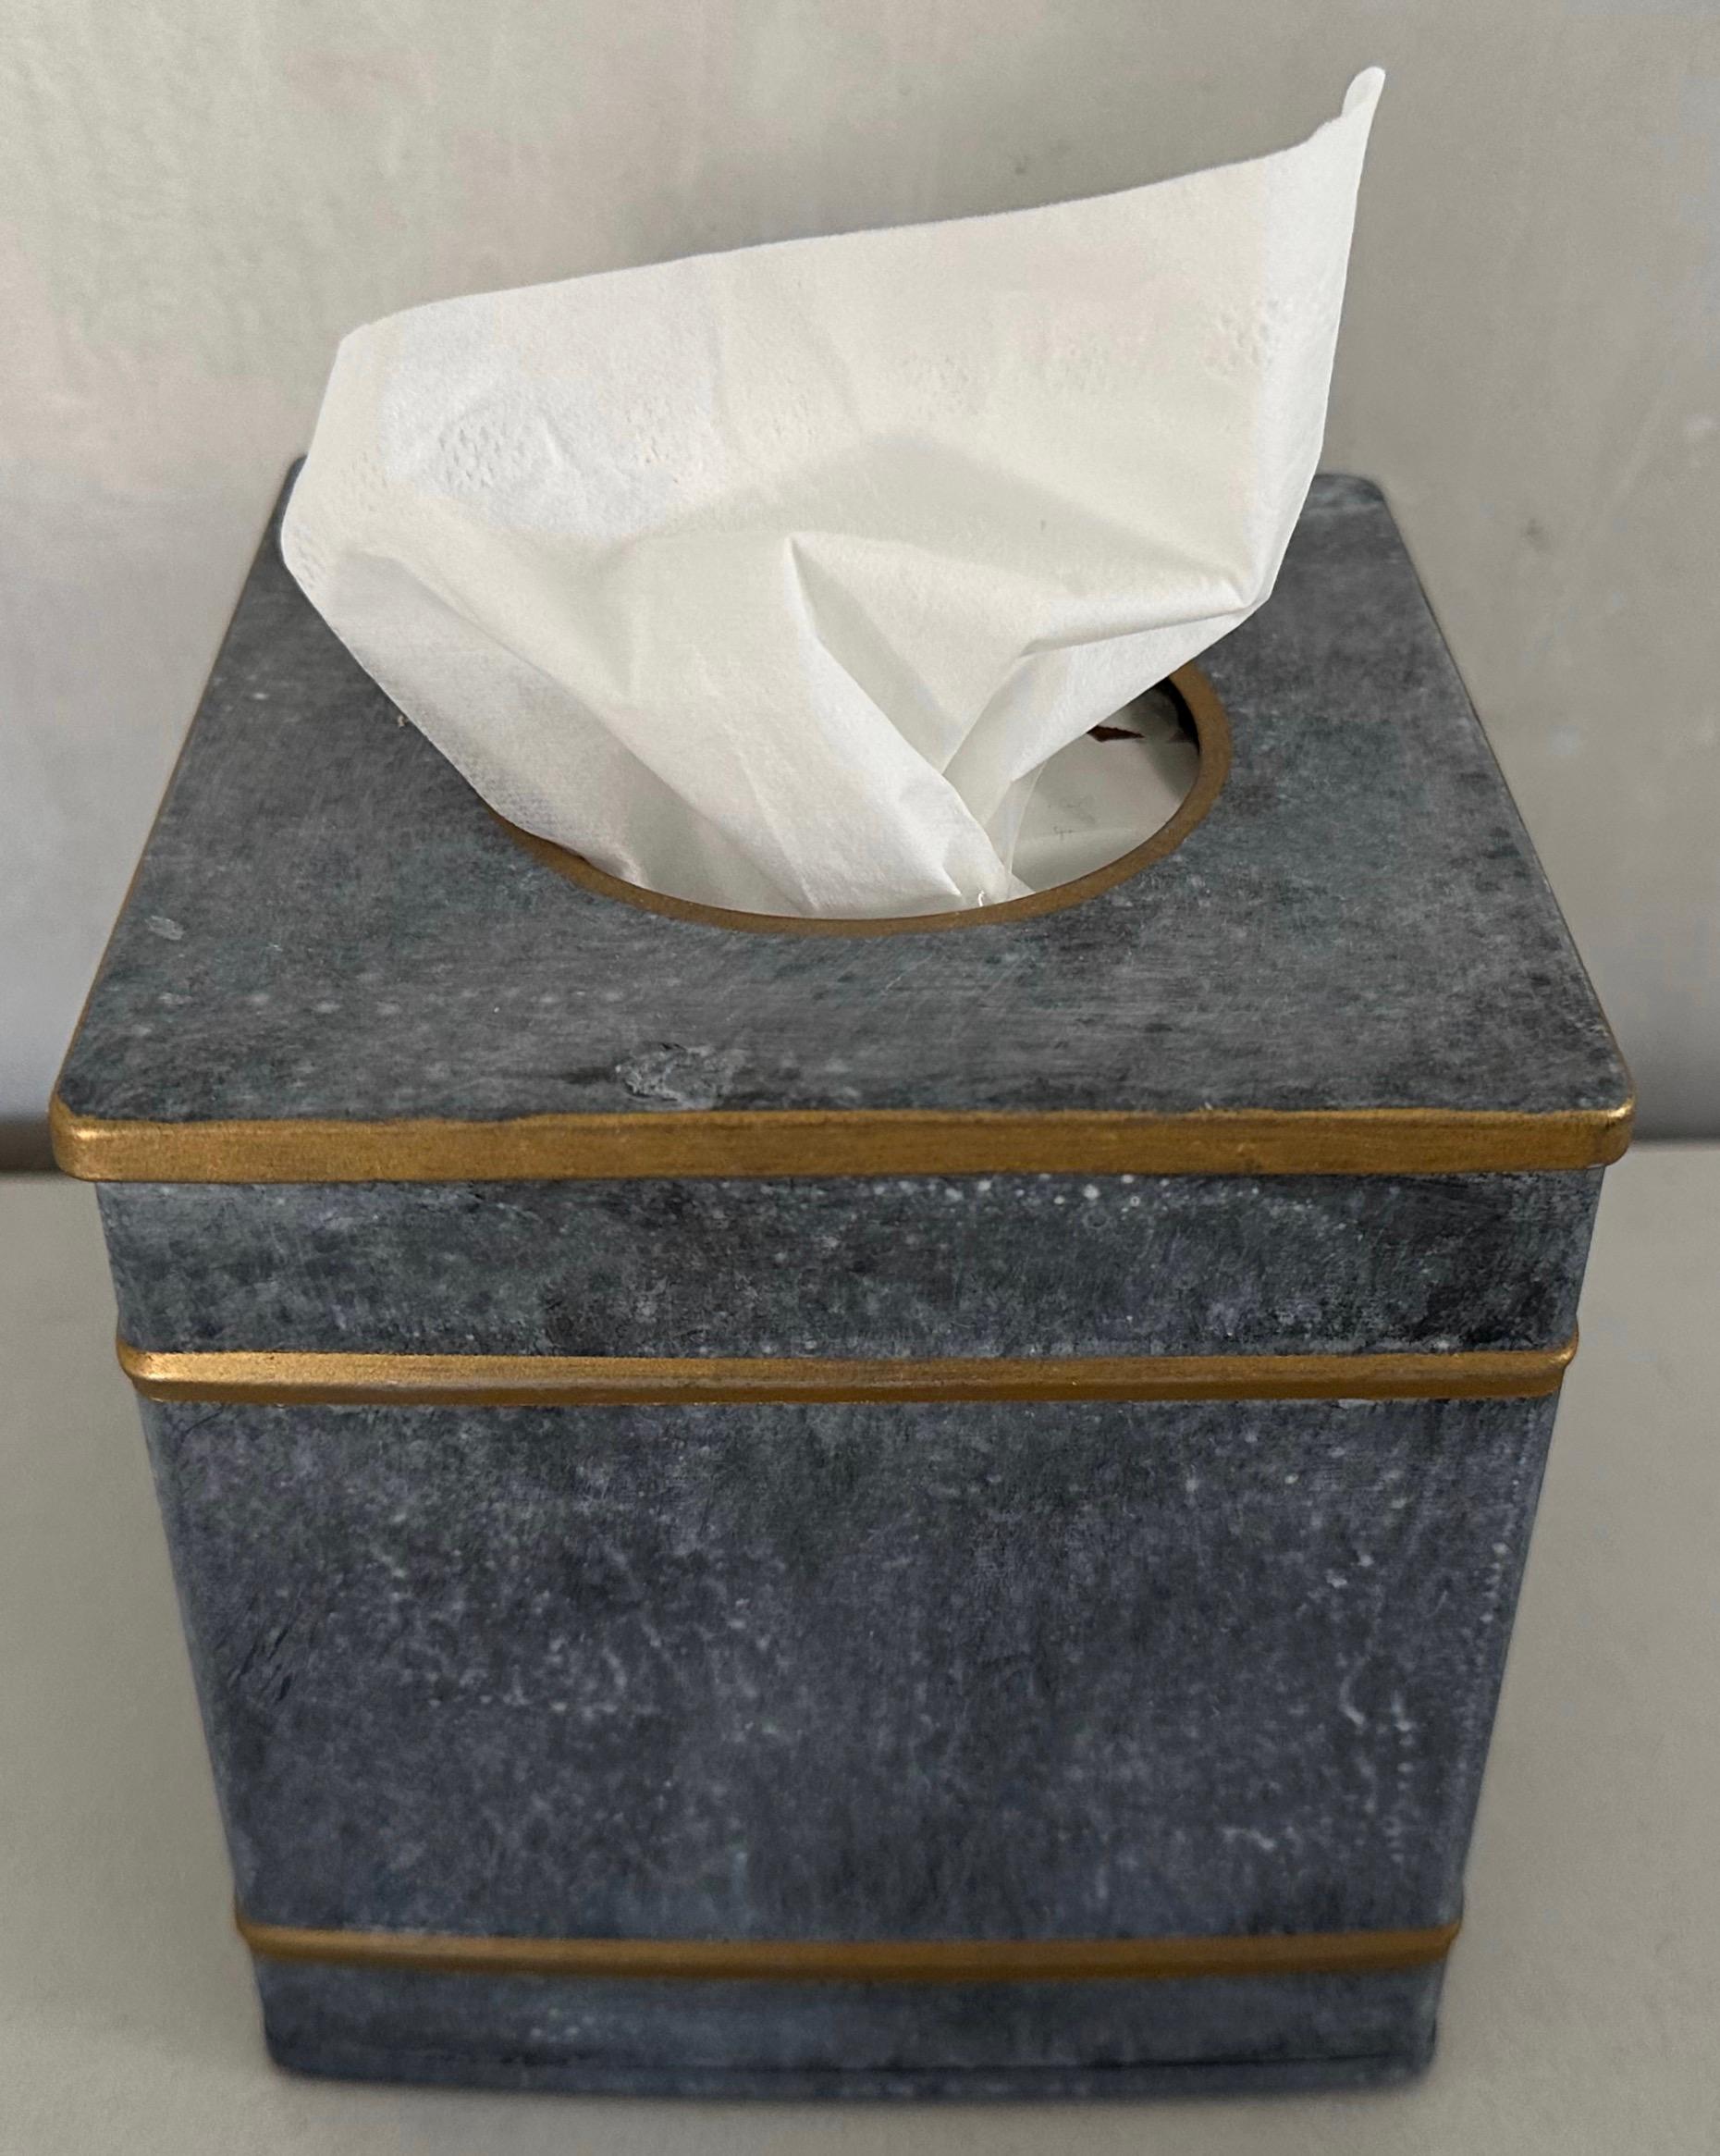 Add a neoclassical country touch to your countertop or nightstand with a gold gilt edge grey painted galvanized tissue box cover. Add fashion and protection for your facial tissue. Enhance the old fashioned feel of your bathroom by adding a